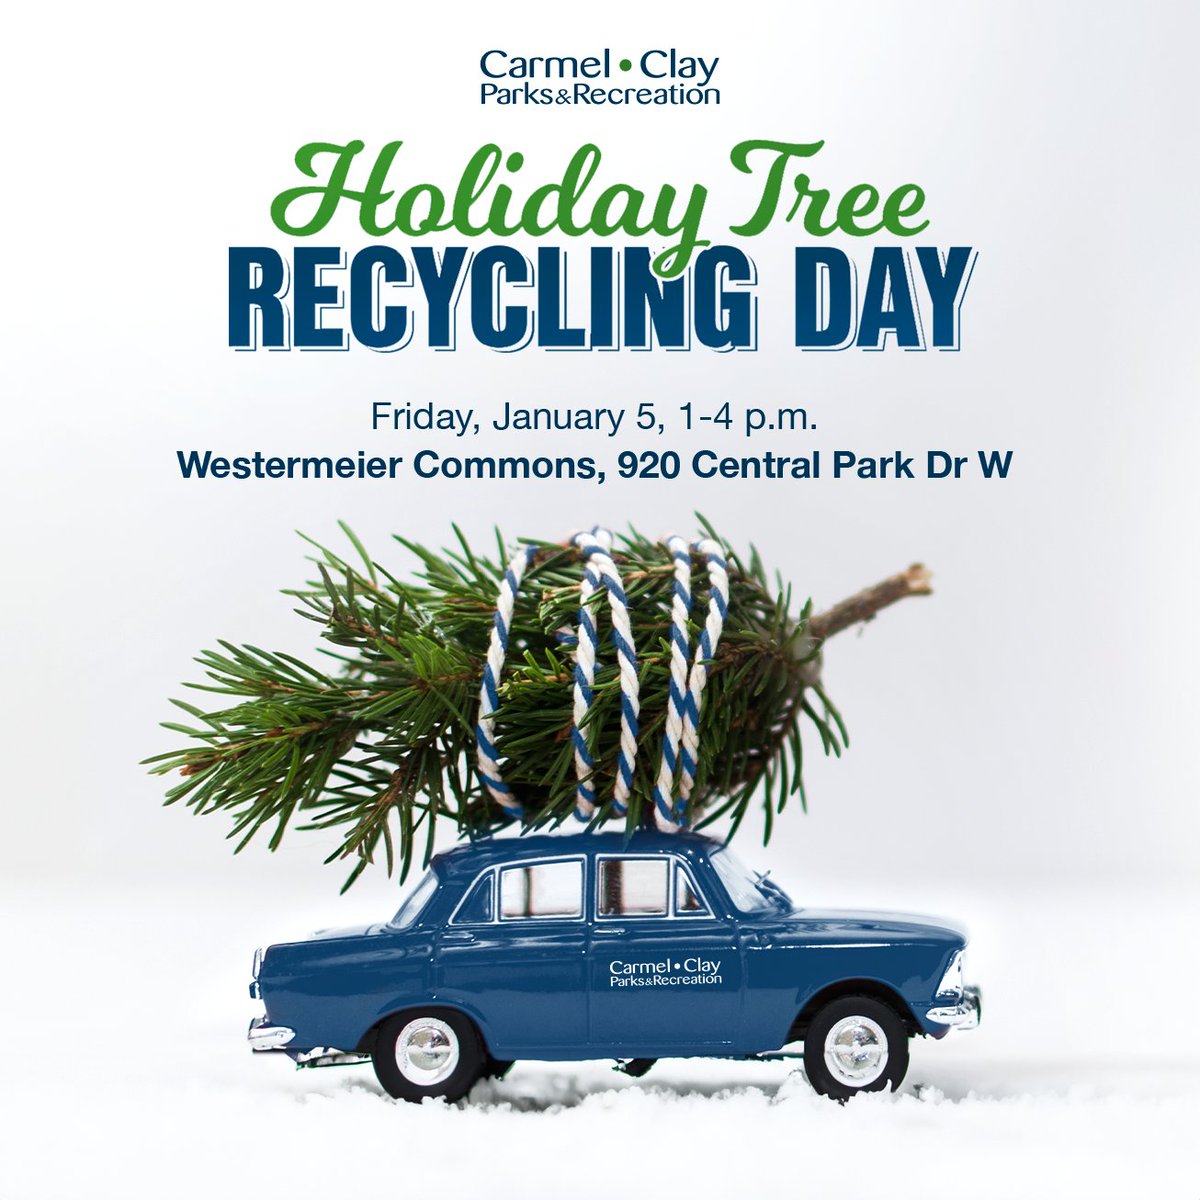 We will host our annual Holiday Tree Recycling event on Jan 5 from 1-4 p.m. at Westermeier Commons in Central Park. To participate in the drive-through style event, bring your live, decoration-free holiday tree to be donated to Xanderbuilt Tree Care to be mulched.